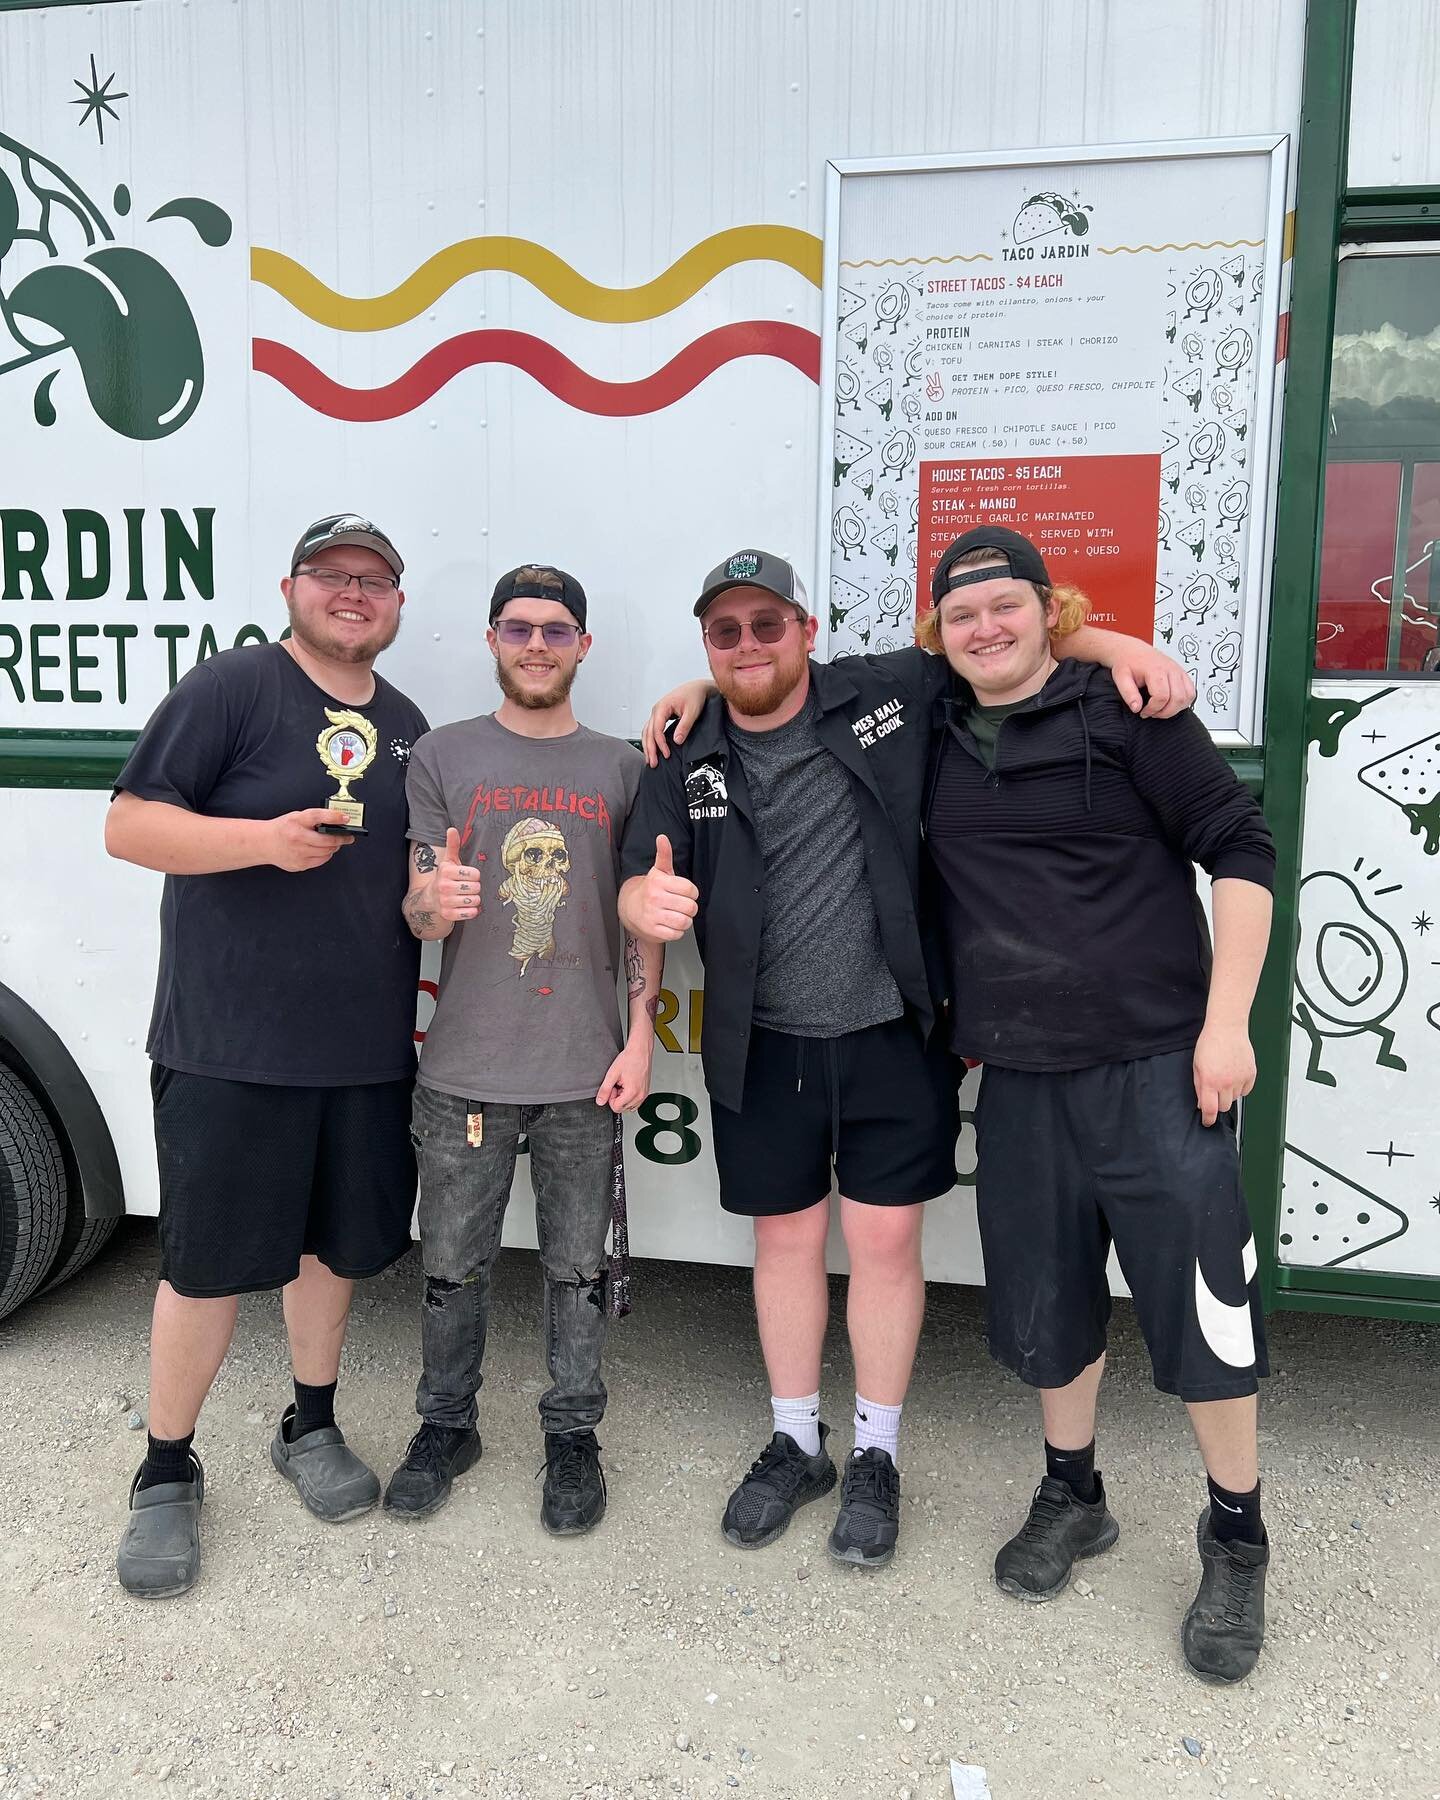 FEELIN STOKED AND GRATEFUL TO HAVE WON THE HARVEST RIDGE WINERY FOOD TRUCK COMPETITION THIS PAST WEEKEND! THANKS SO MUCH FAM, ITS A PRIVILEGE TO FEED YOUS! 🫶🔥🌮🎉